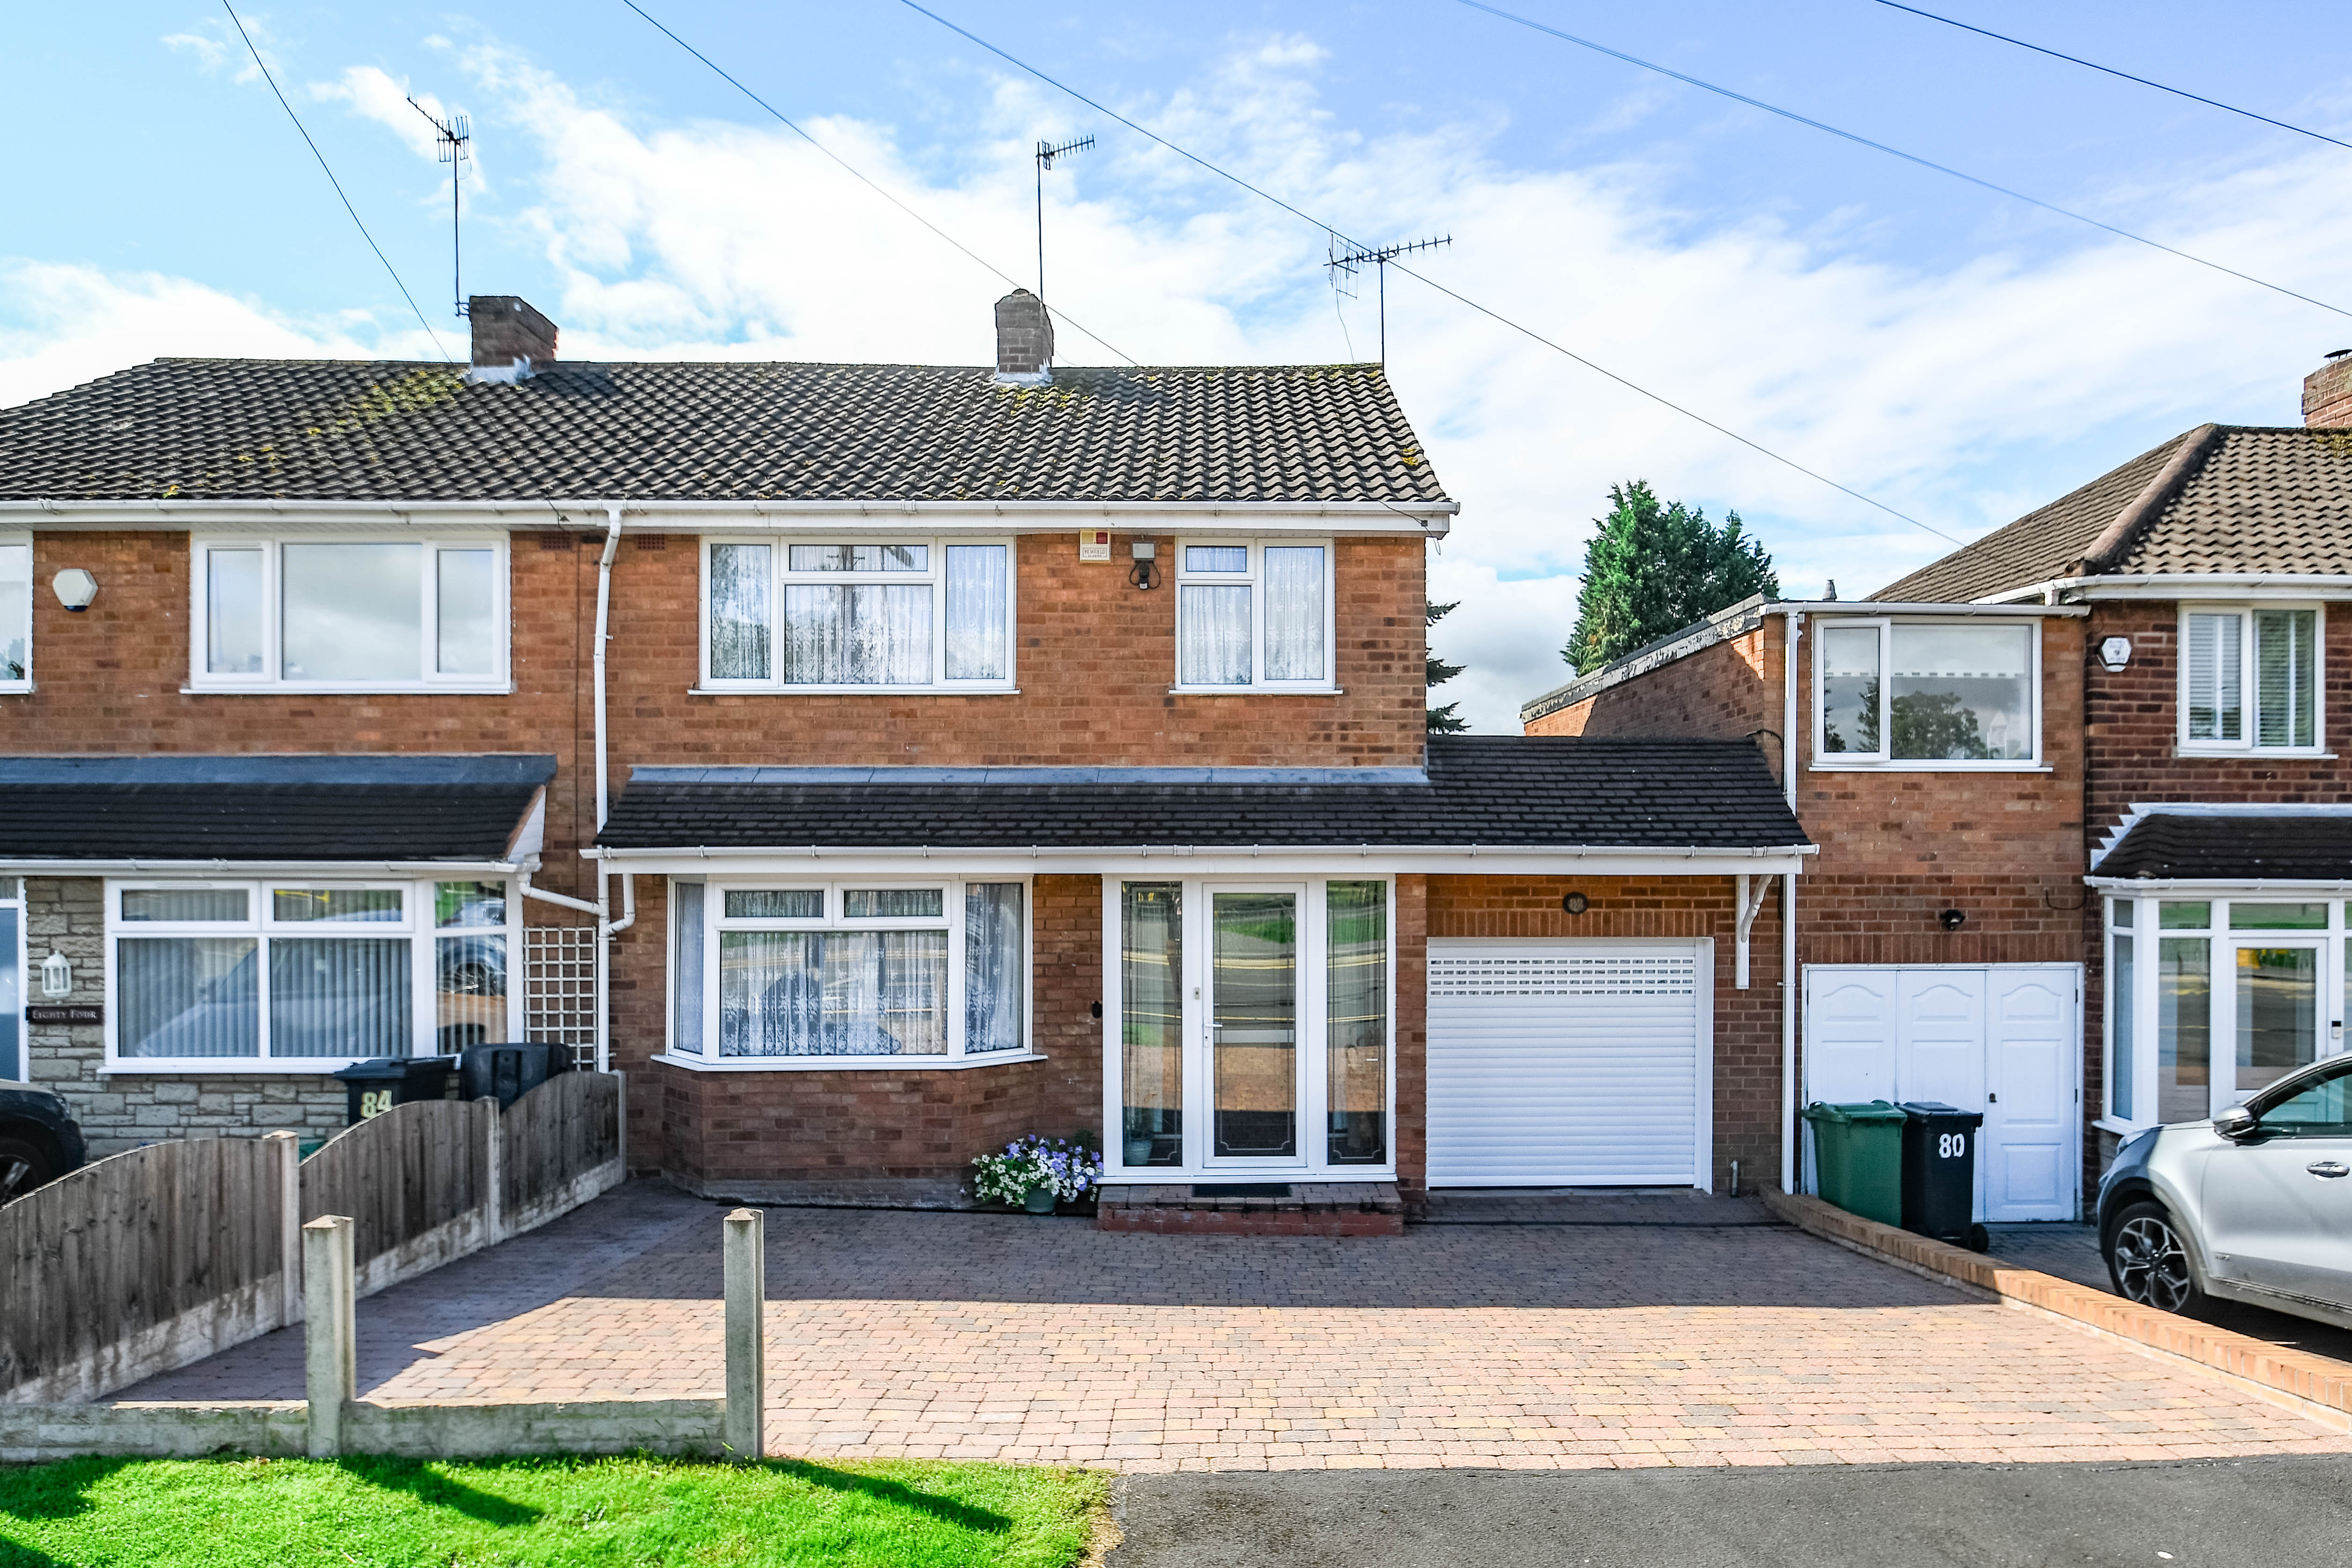 3 bed house for sale in Whittingham Road, Halesowen  - Property Image 1